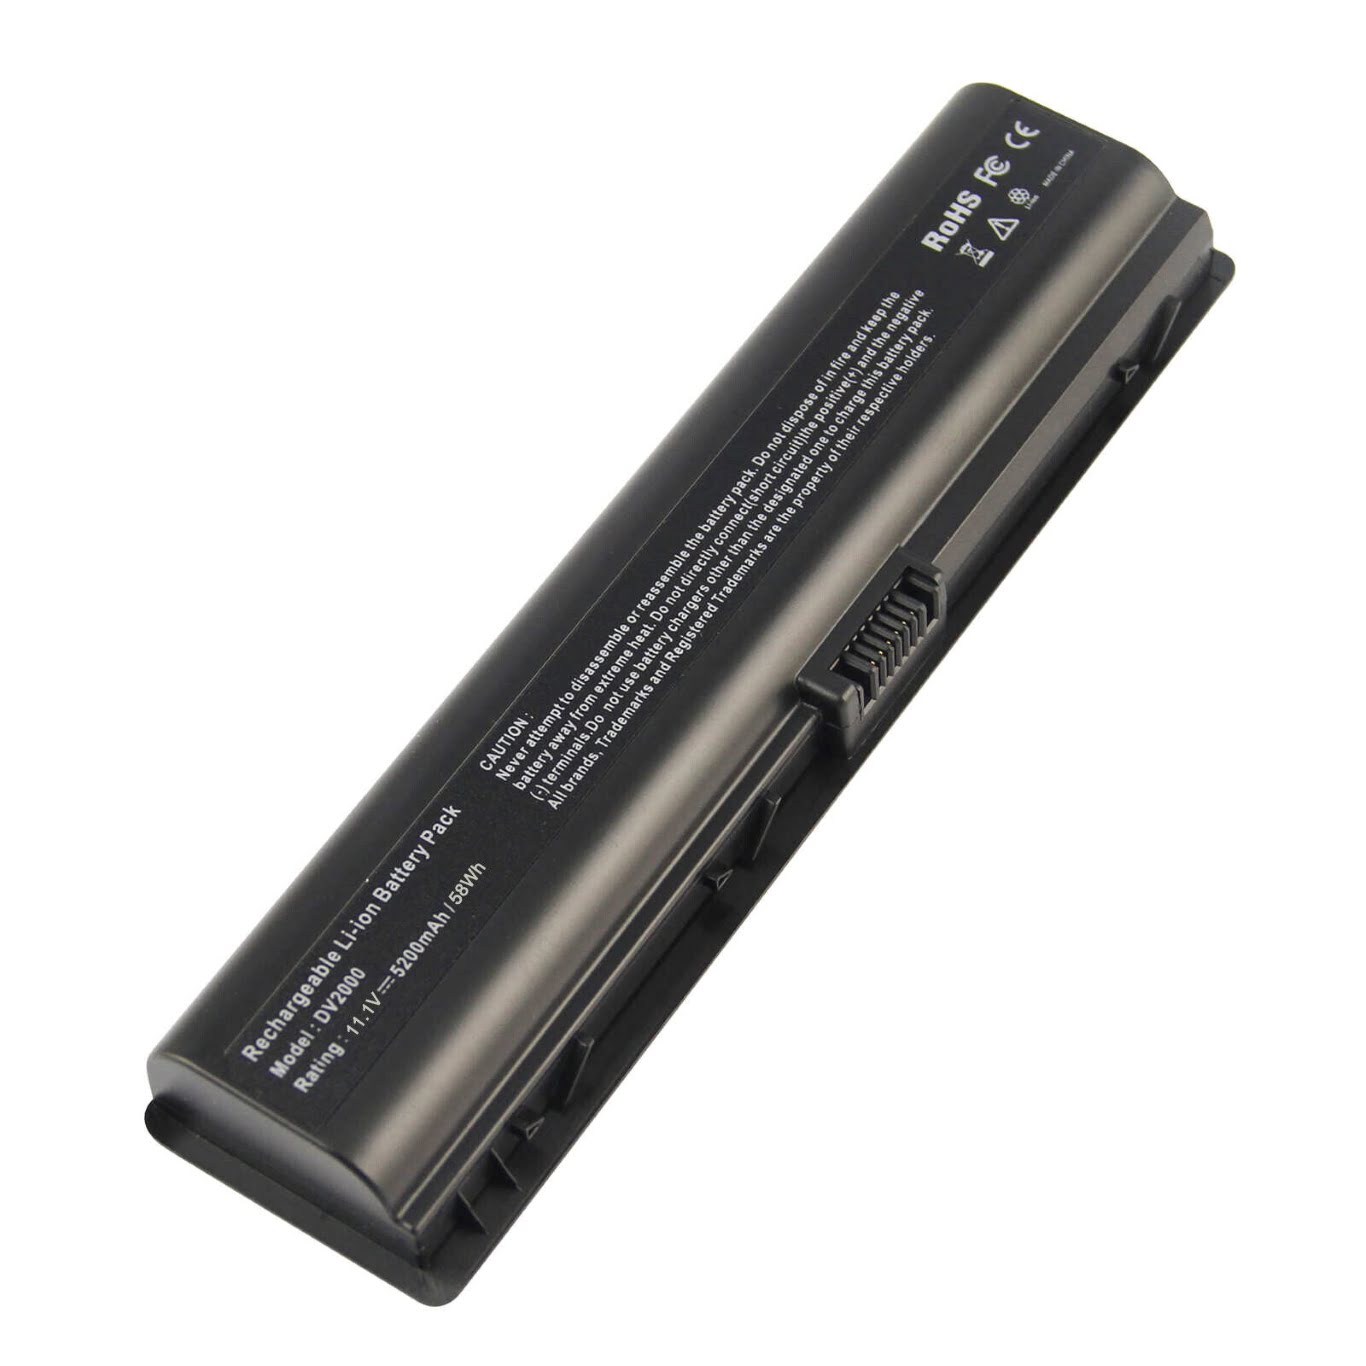 411462-121, 411462-141 replacement Laptop Battery for HP 6000XX, CTO, 11.1 V, 6 cells, 5200 Mah